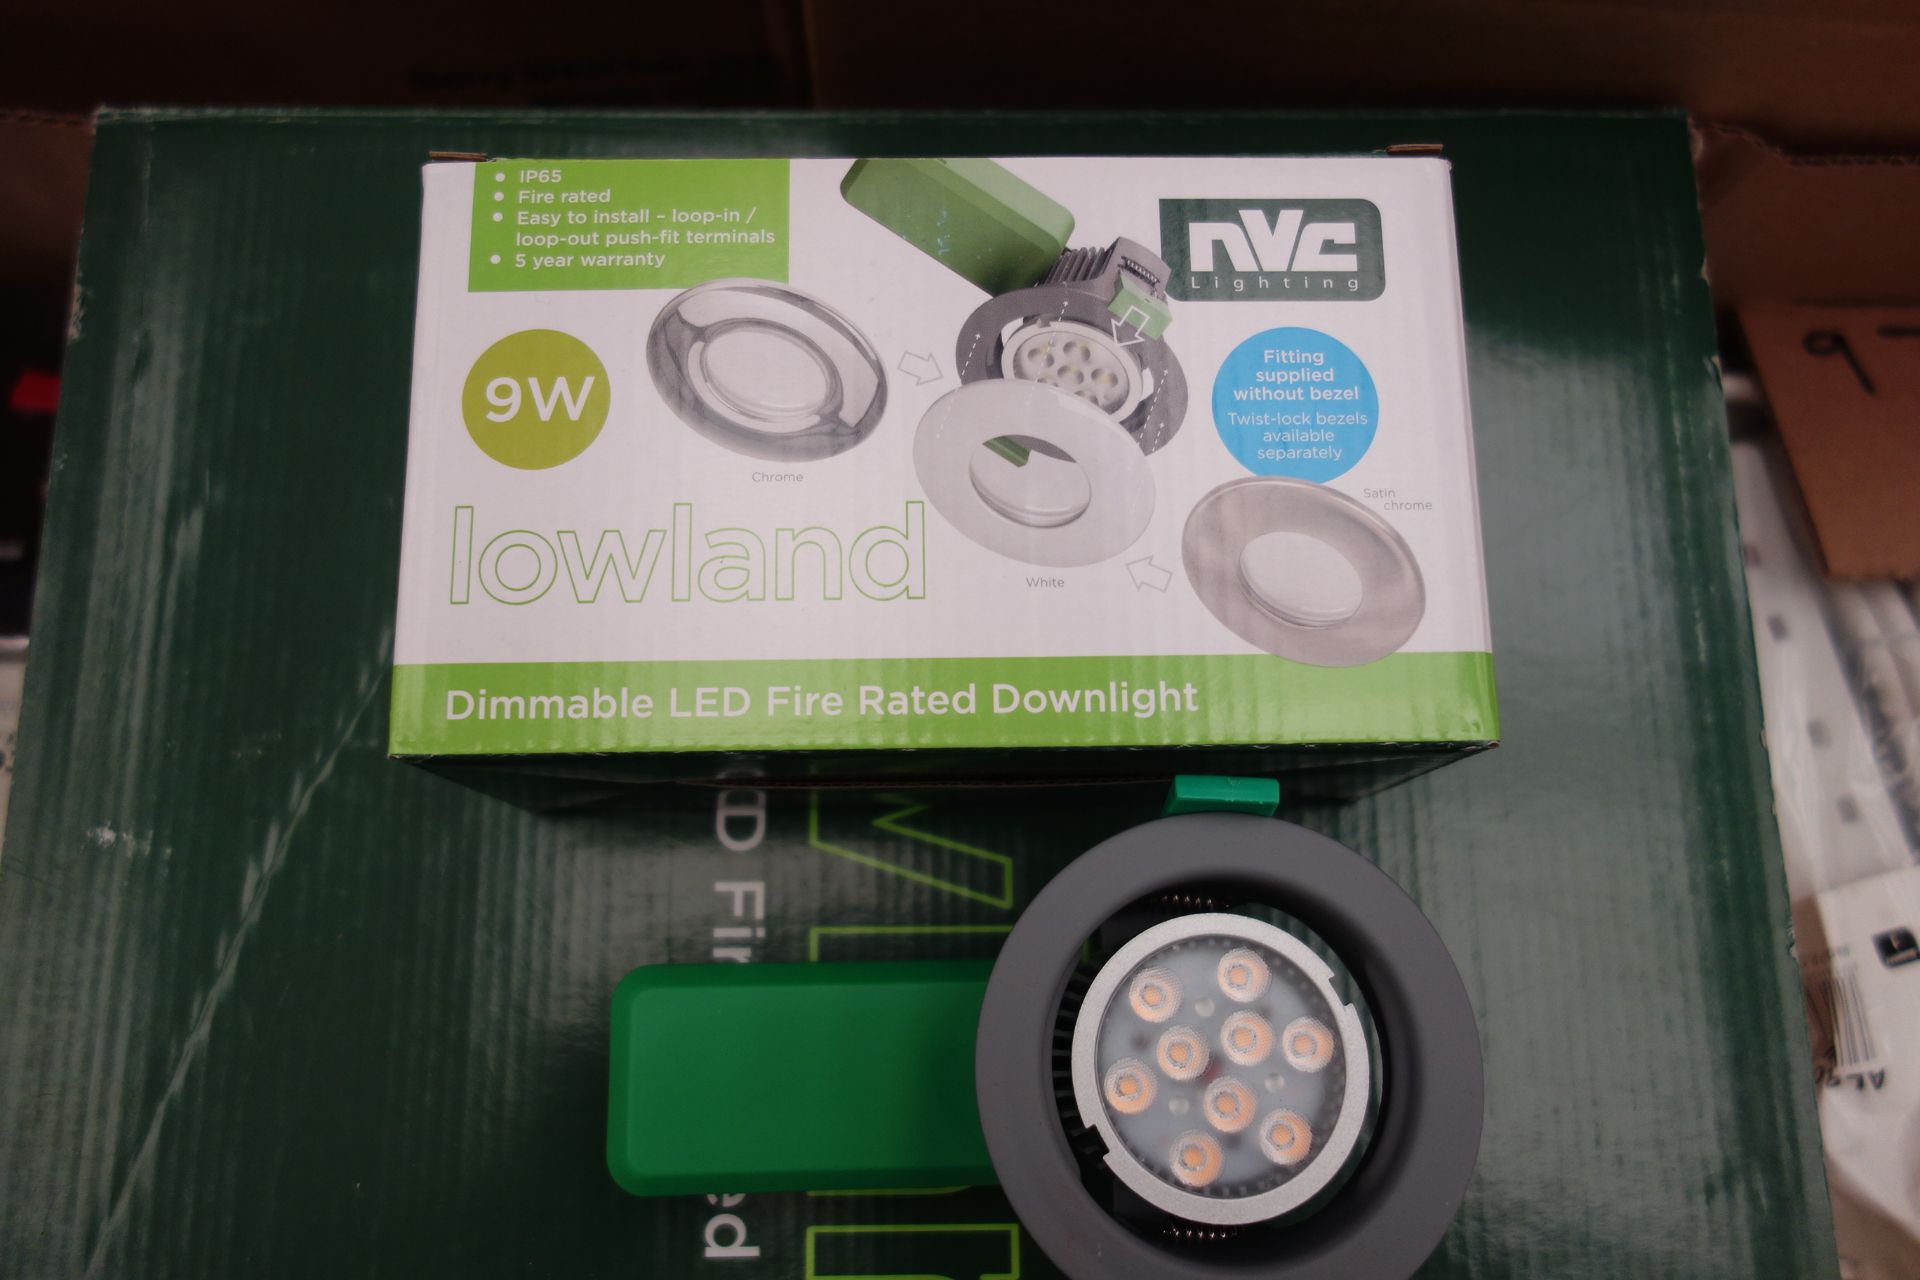 20x NVC NLW9|MD|830 9W LED Dimmable Downlights. Fire-rated C|W Polished Chrome And Satin Chrome